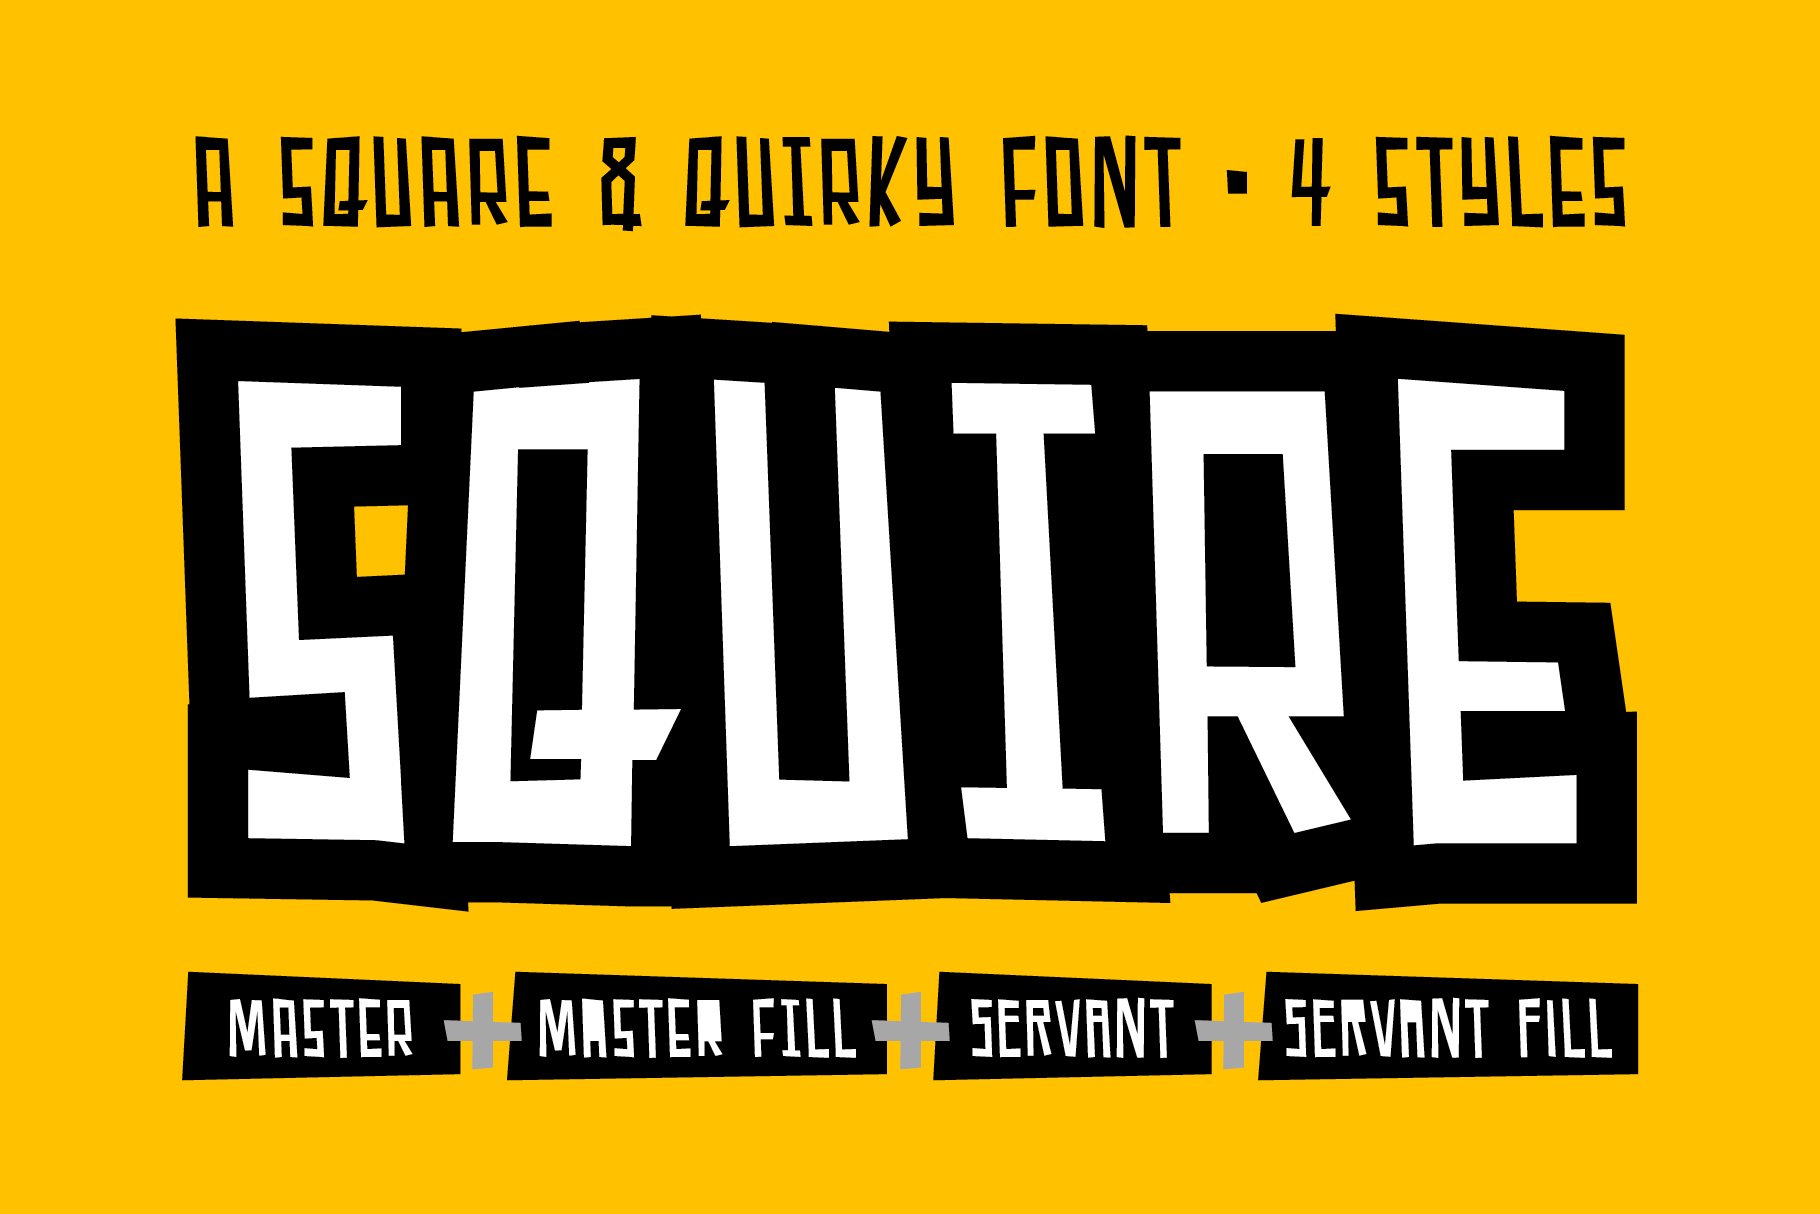 SQUIRE - a square and quirky font!!! cover image.